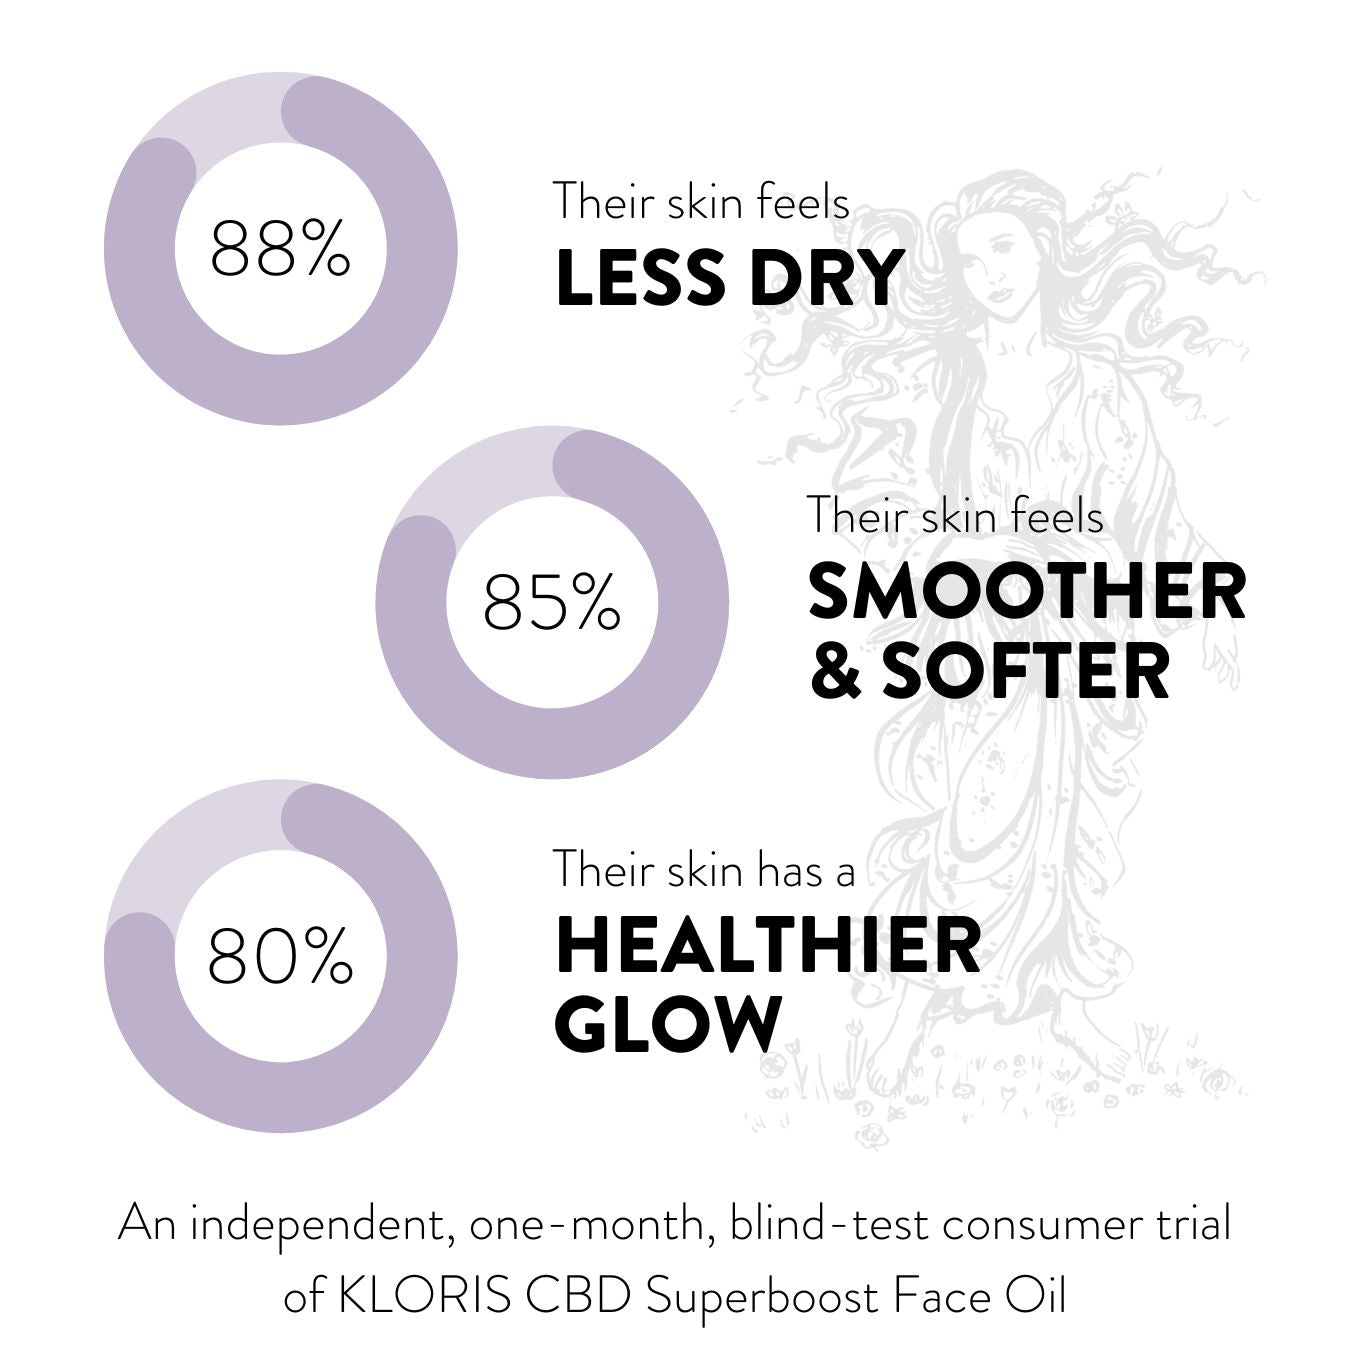 Superboost Face Oil consumer trial results